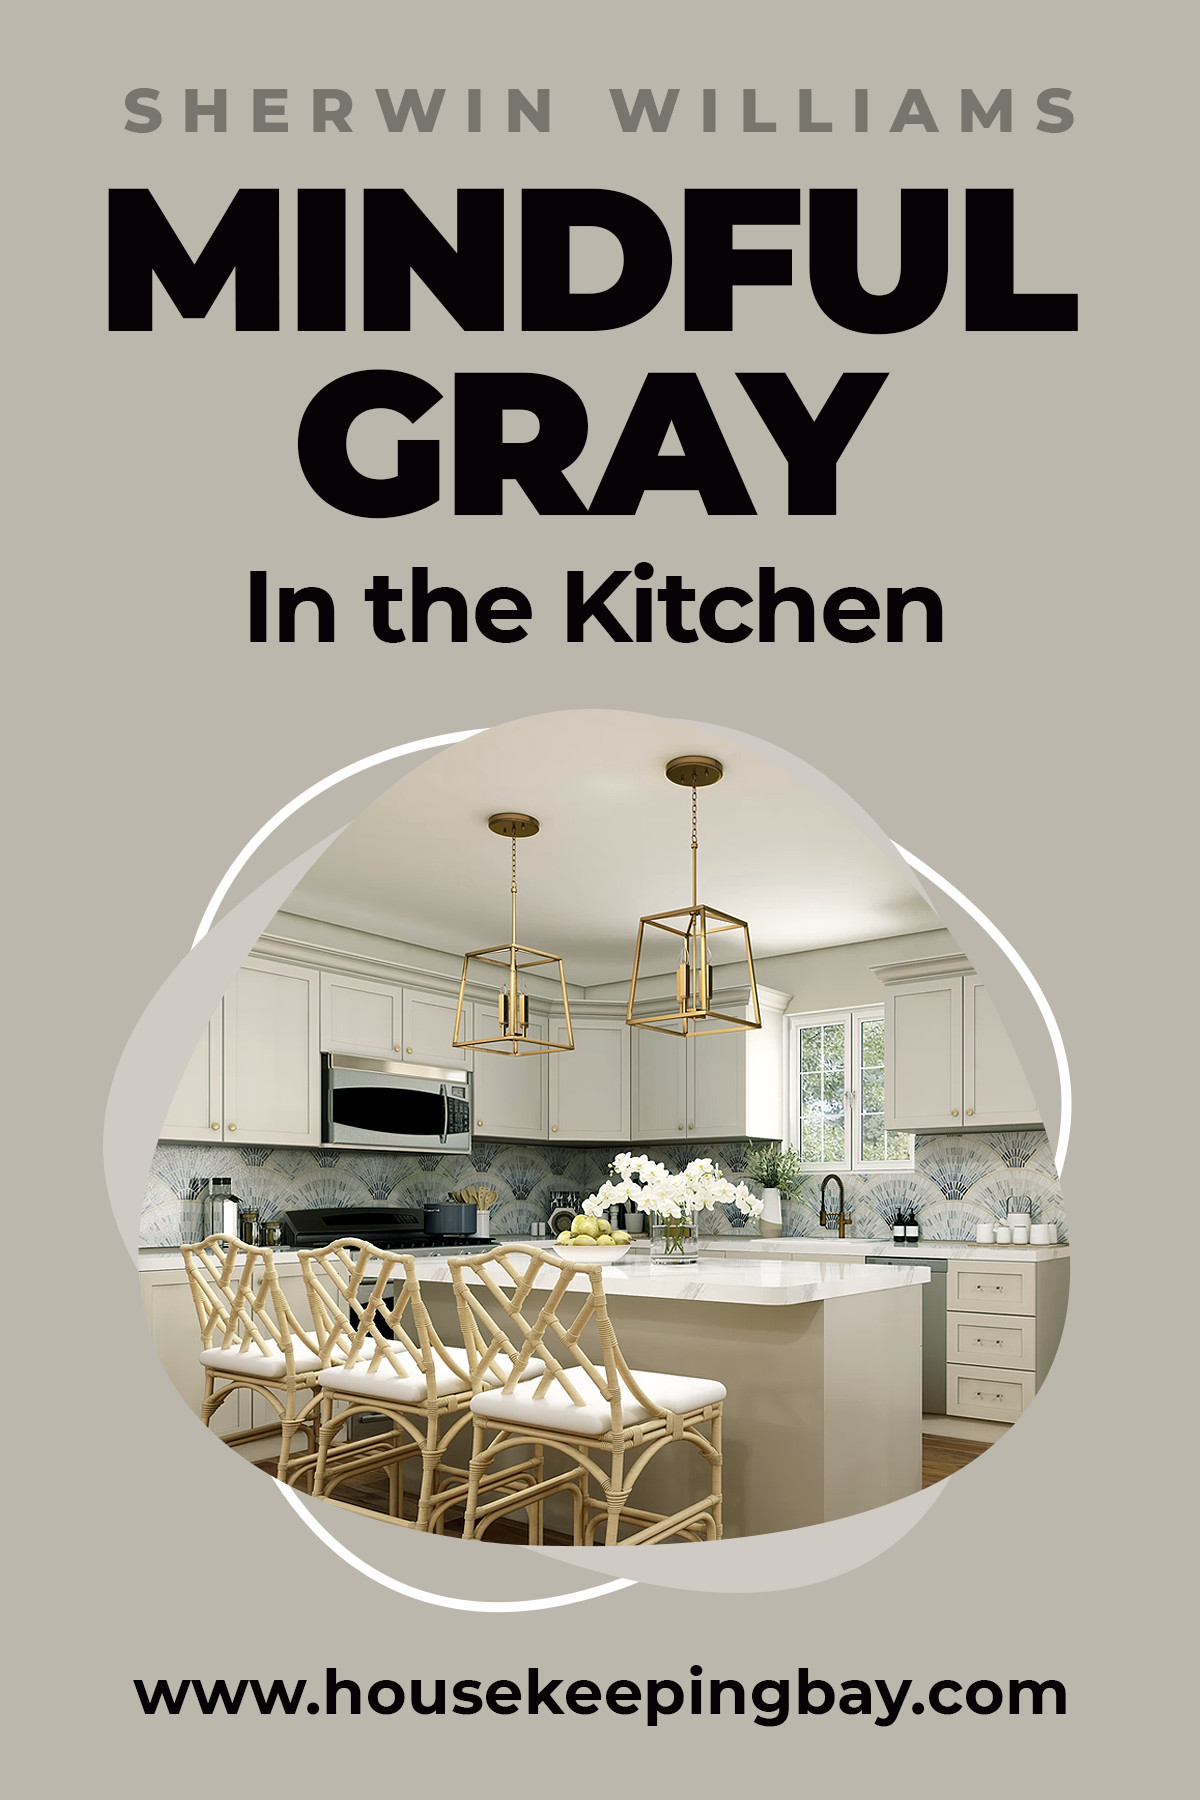 Mindful Gray In the Kitchen